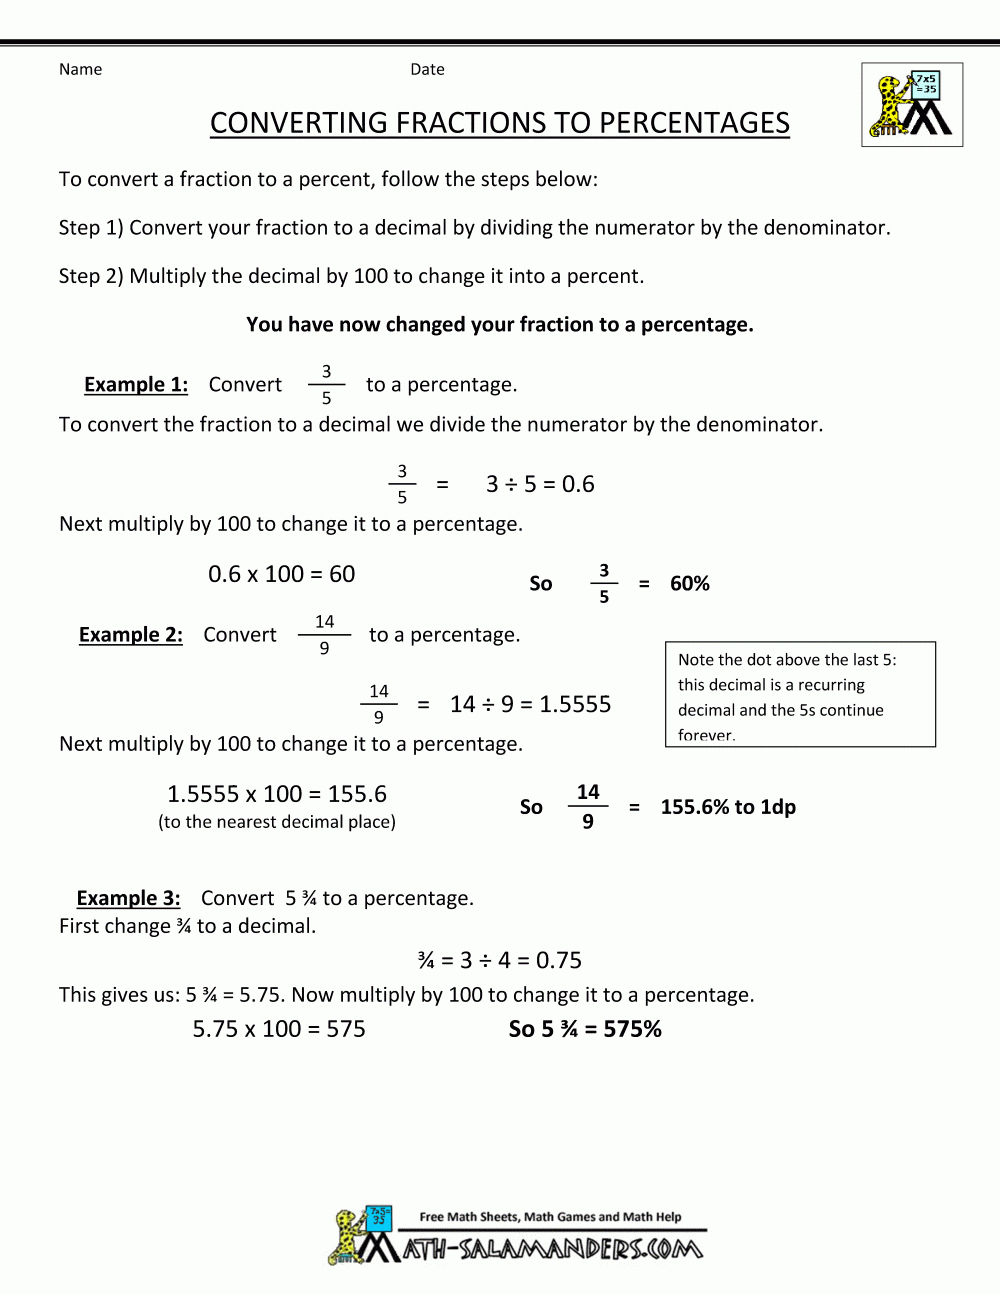 Converting Fractions To Percentages Along With Fractions And Percentages Worksheets